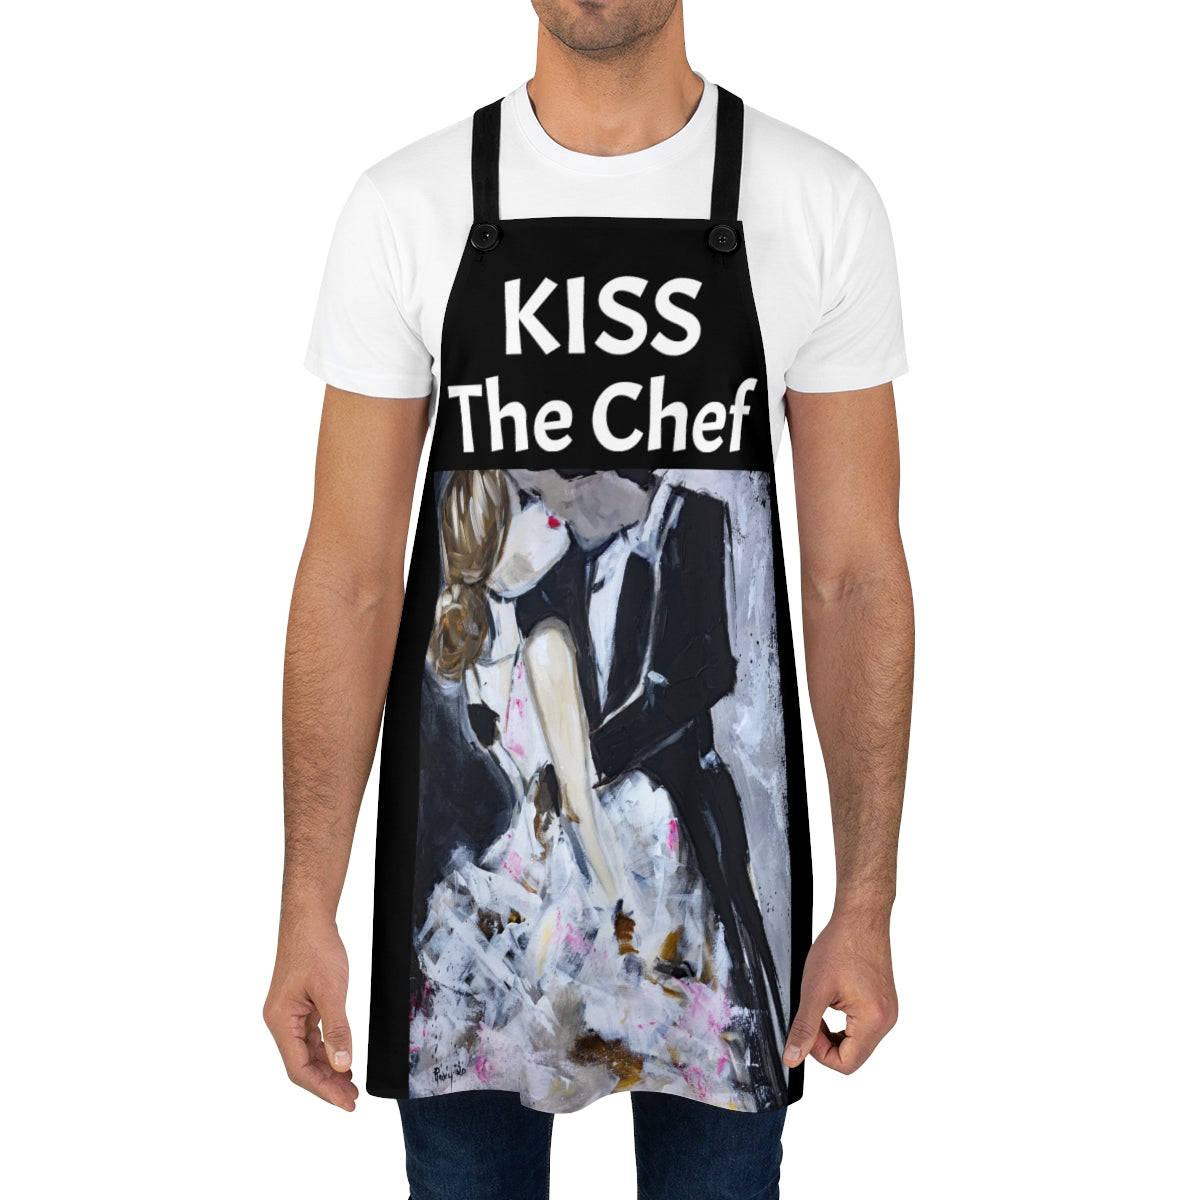 Kiss the Chef Apron Bride and Groom